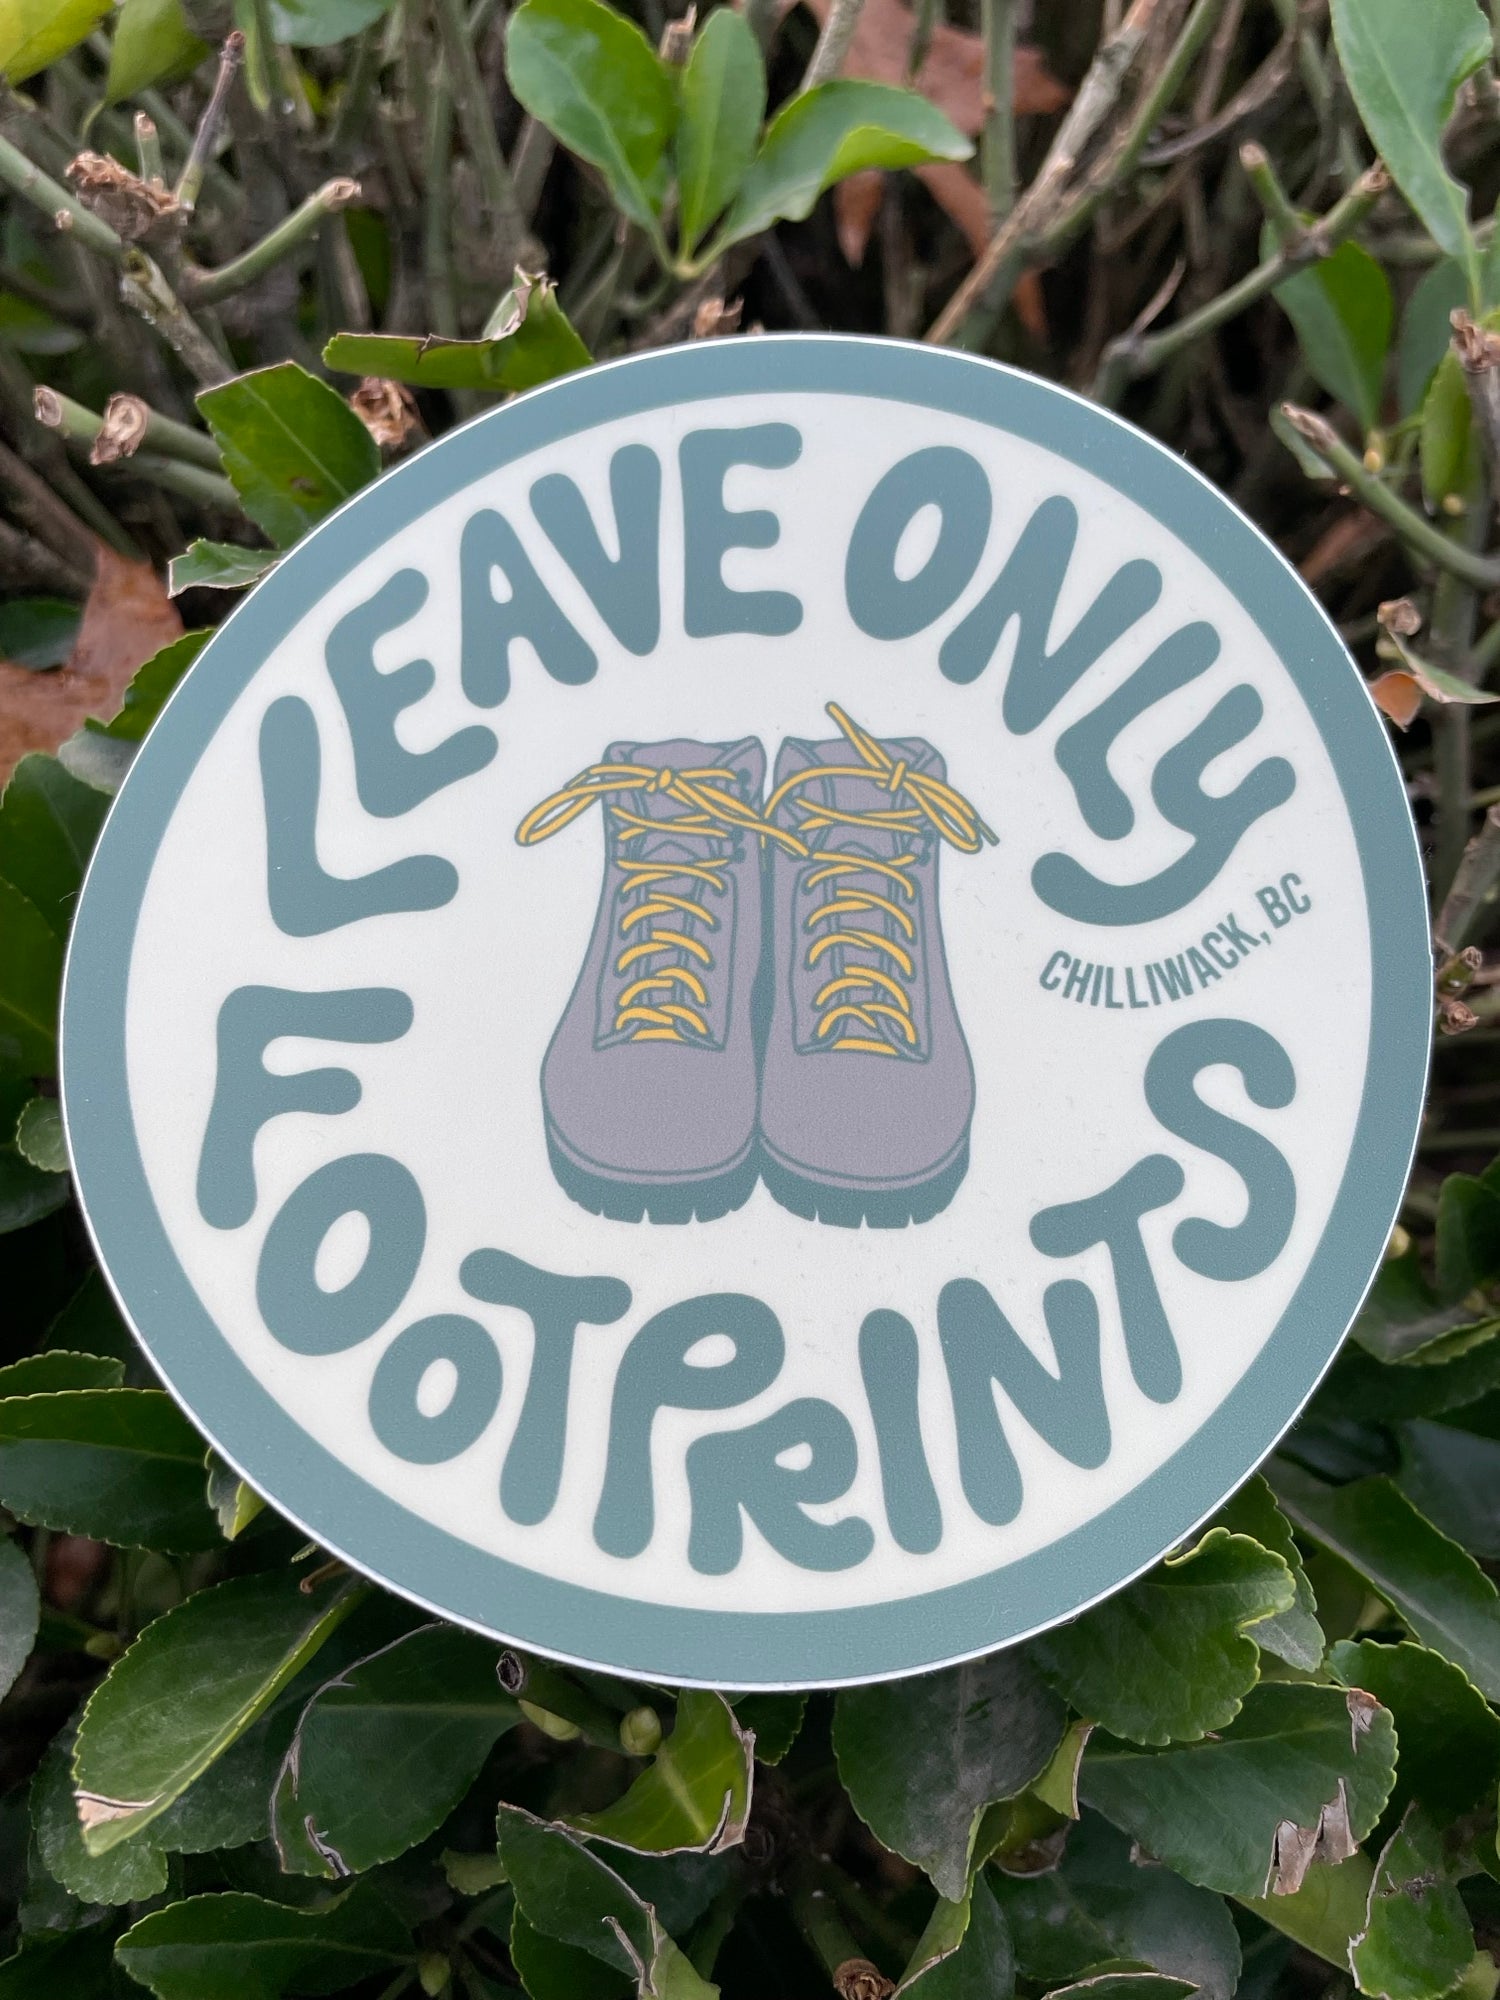 Leave Only Footprints - Small